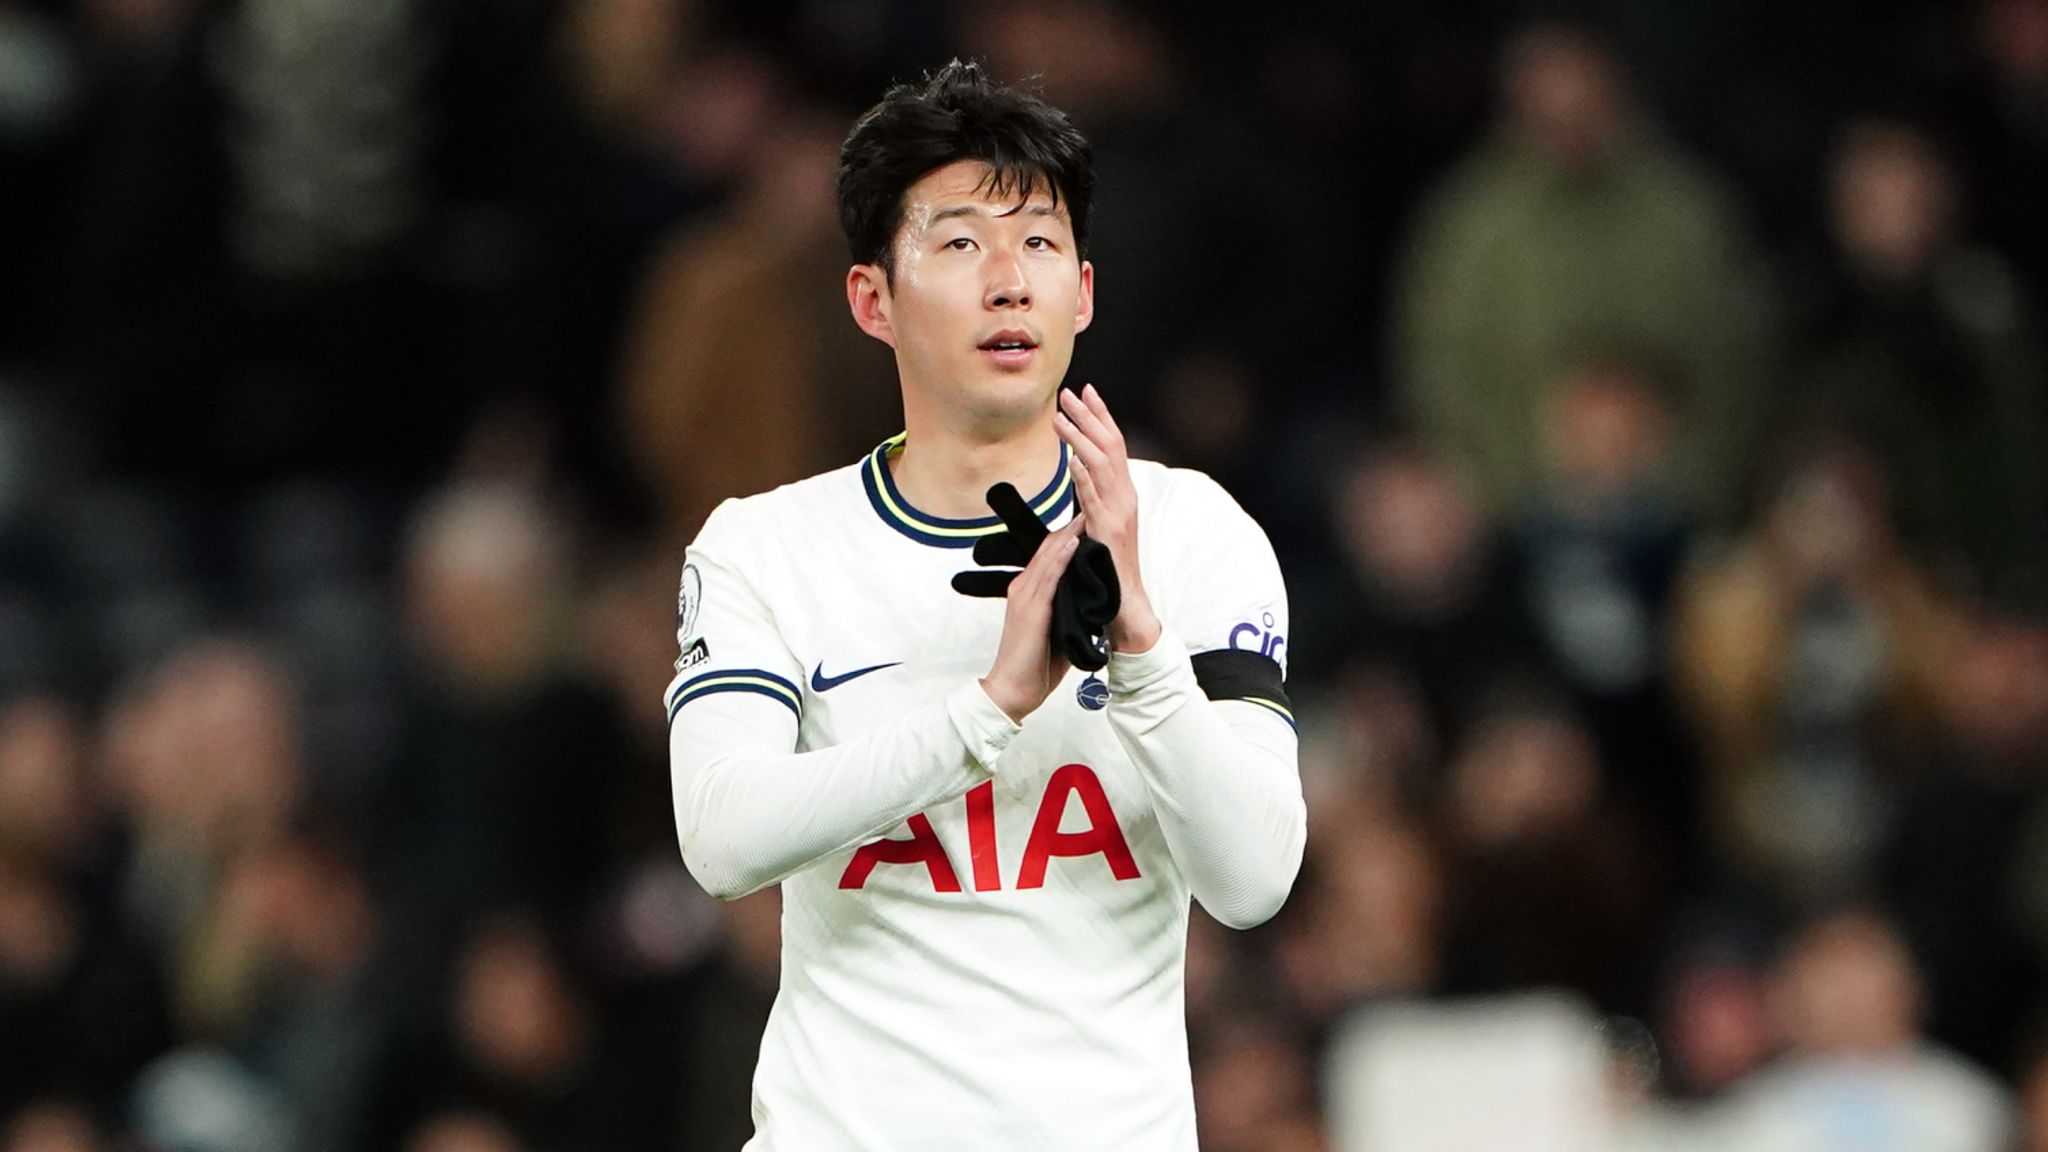 Spurs footballer Heung-Min Son subjected to 'utterly reprehensible' racist  abuse | UK News | Sky News